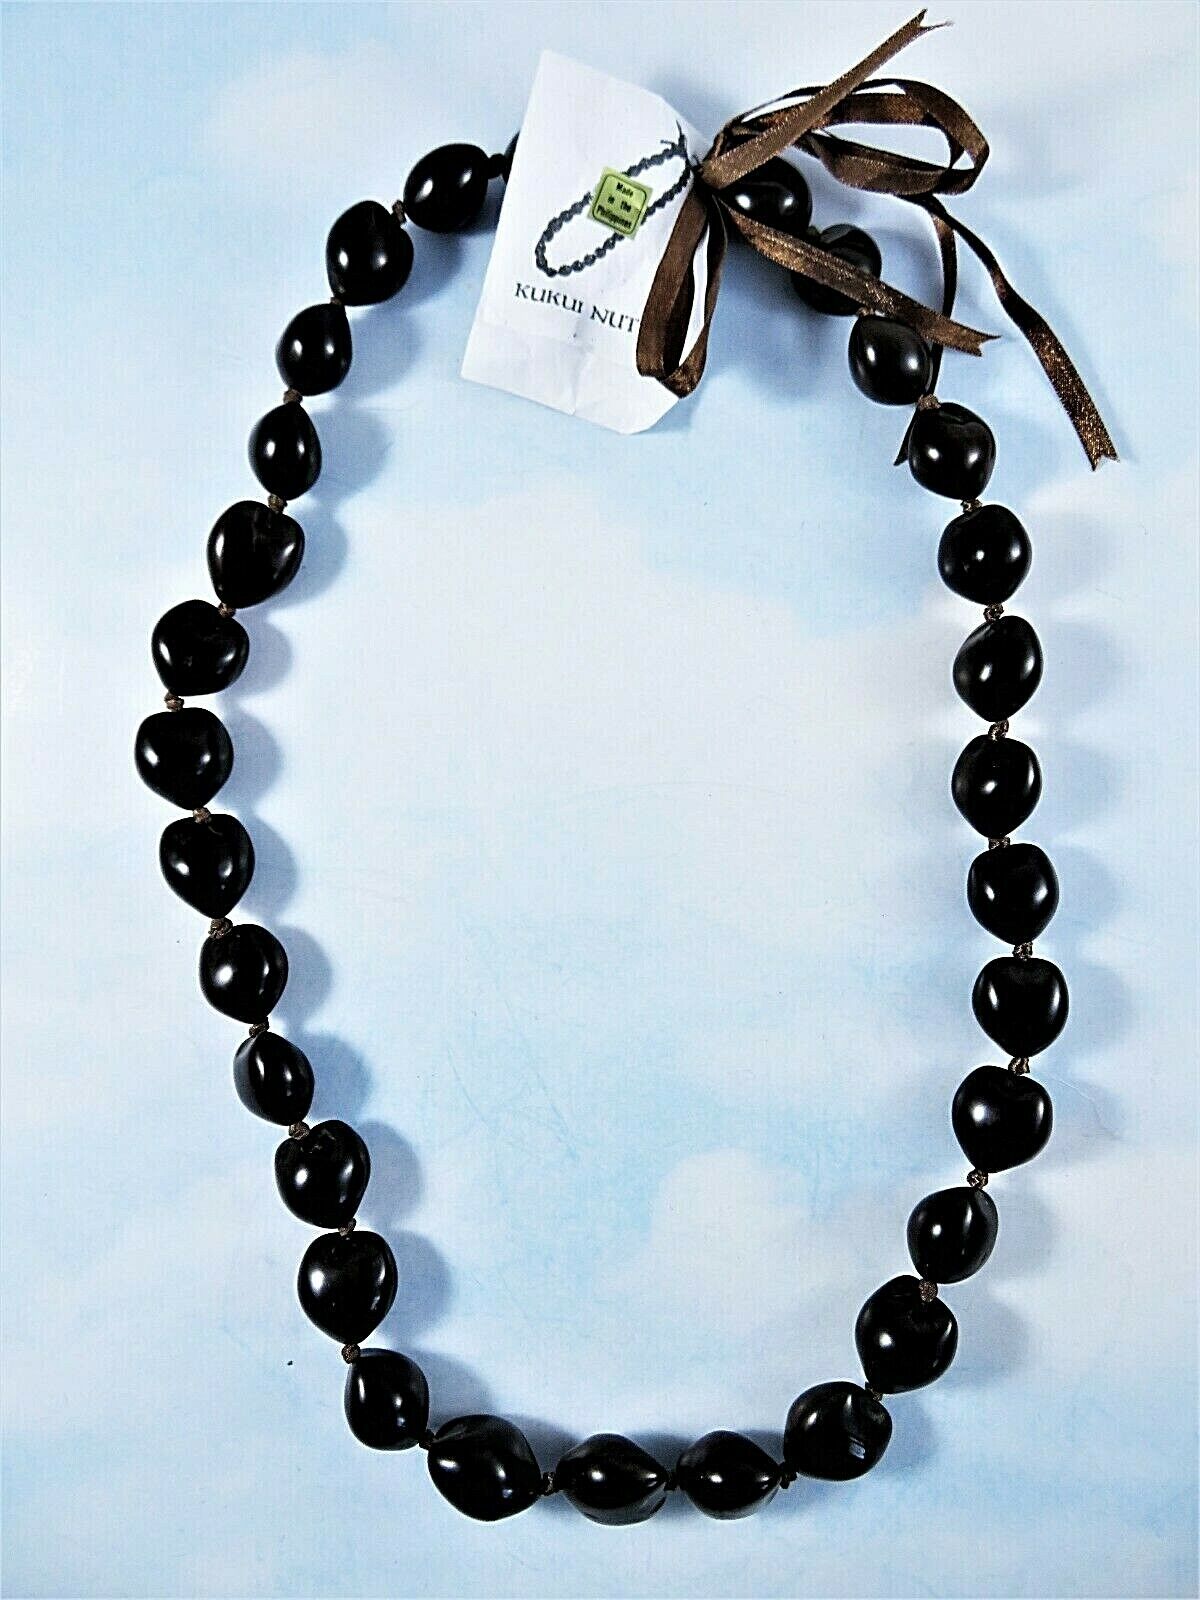 Hawaiian Leis Kukui Nut Beads Necklaces with Cowrie Shell for Men and Women  28